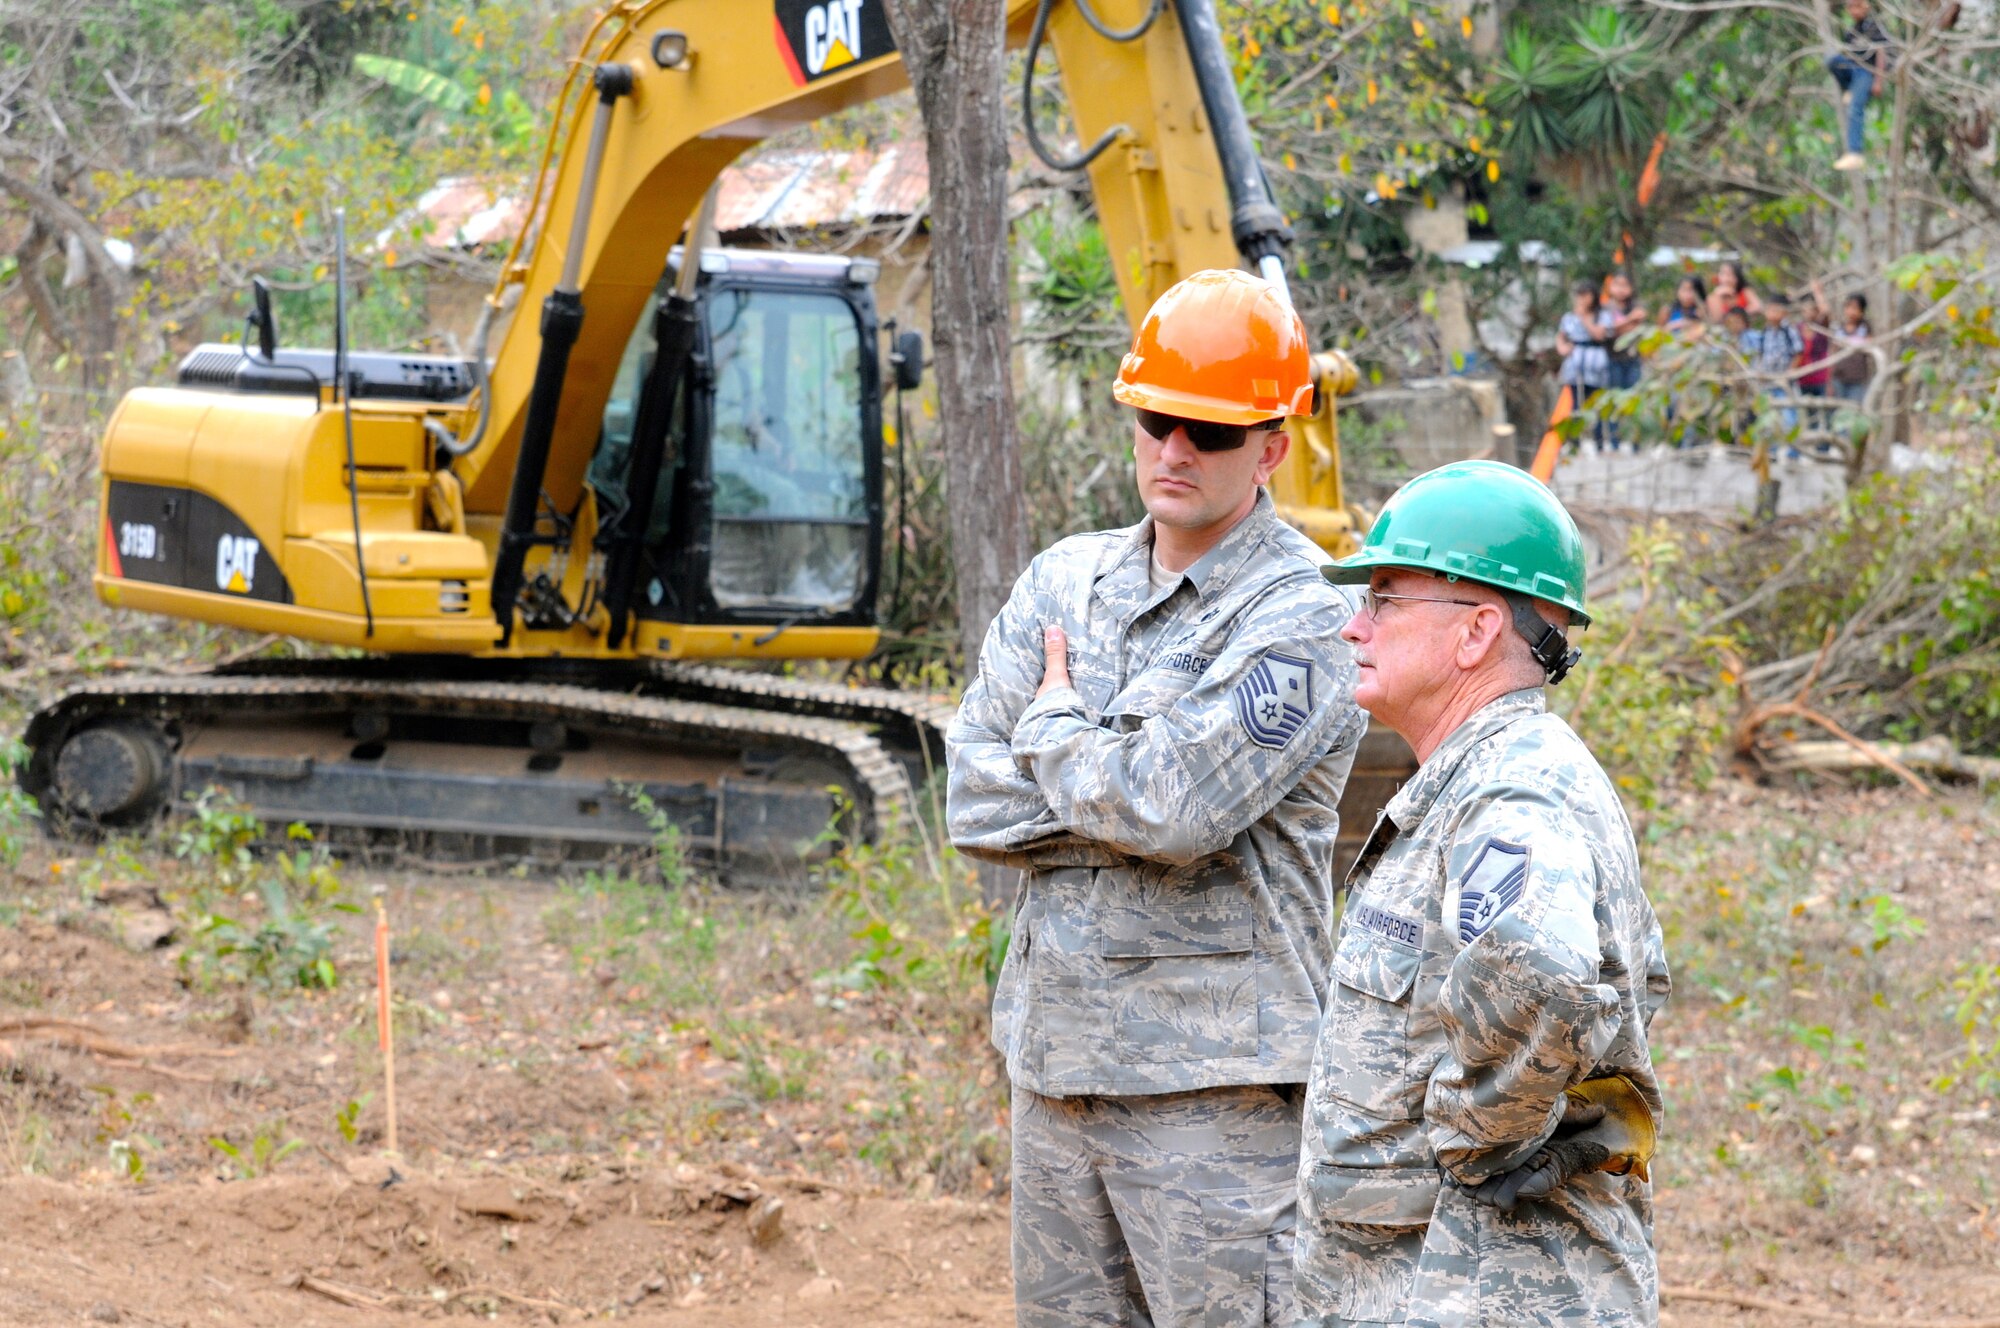 Guatemalan children watch from a nearby tree as Master Sgt. Larry Ricketts discusses construction with Master Sgt. Joshua Rich, 188th Civil Engineer Squadron fist sergeant, during Beyond the Horizon 2014 on April 8. Both Airmen are assigned to the 188th Fighter Wing’s Civil Engineer Squadron, Arkansas Air National Guard. U.S. Army South is partnering with Guatemala to execute Beyond the Horizon, a focused humanitarian assistance operation conducting various engineering assistance, medical, dental and civic action programs. (U.S. Army National Guard photo by Lt. Col. Richard D. Garringer/released)
